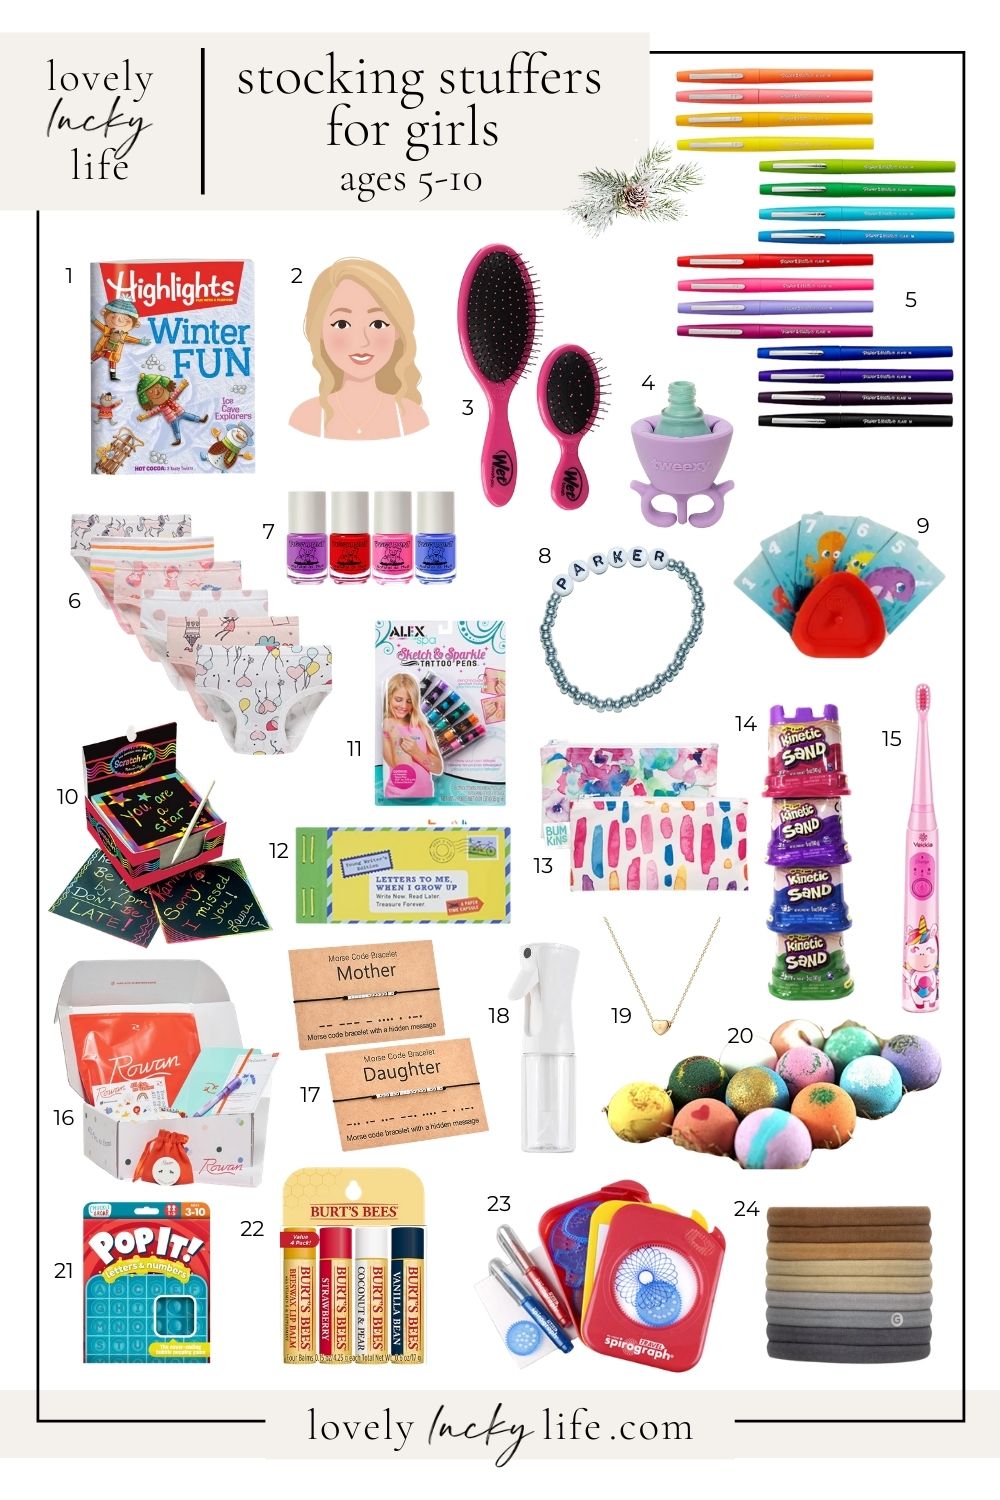 $5 Gifts For Christmas (80+ Ideas All From !) - Small Stuff Counts